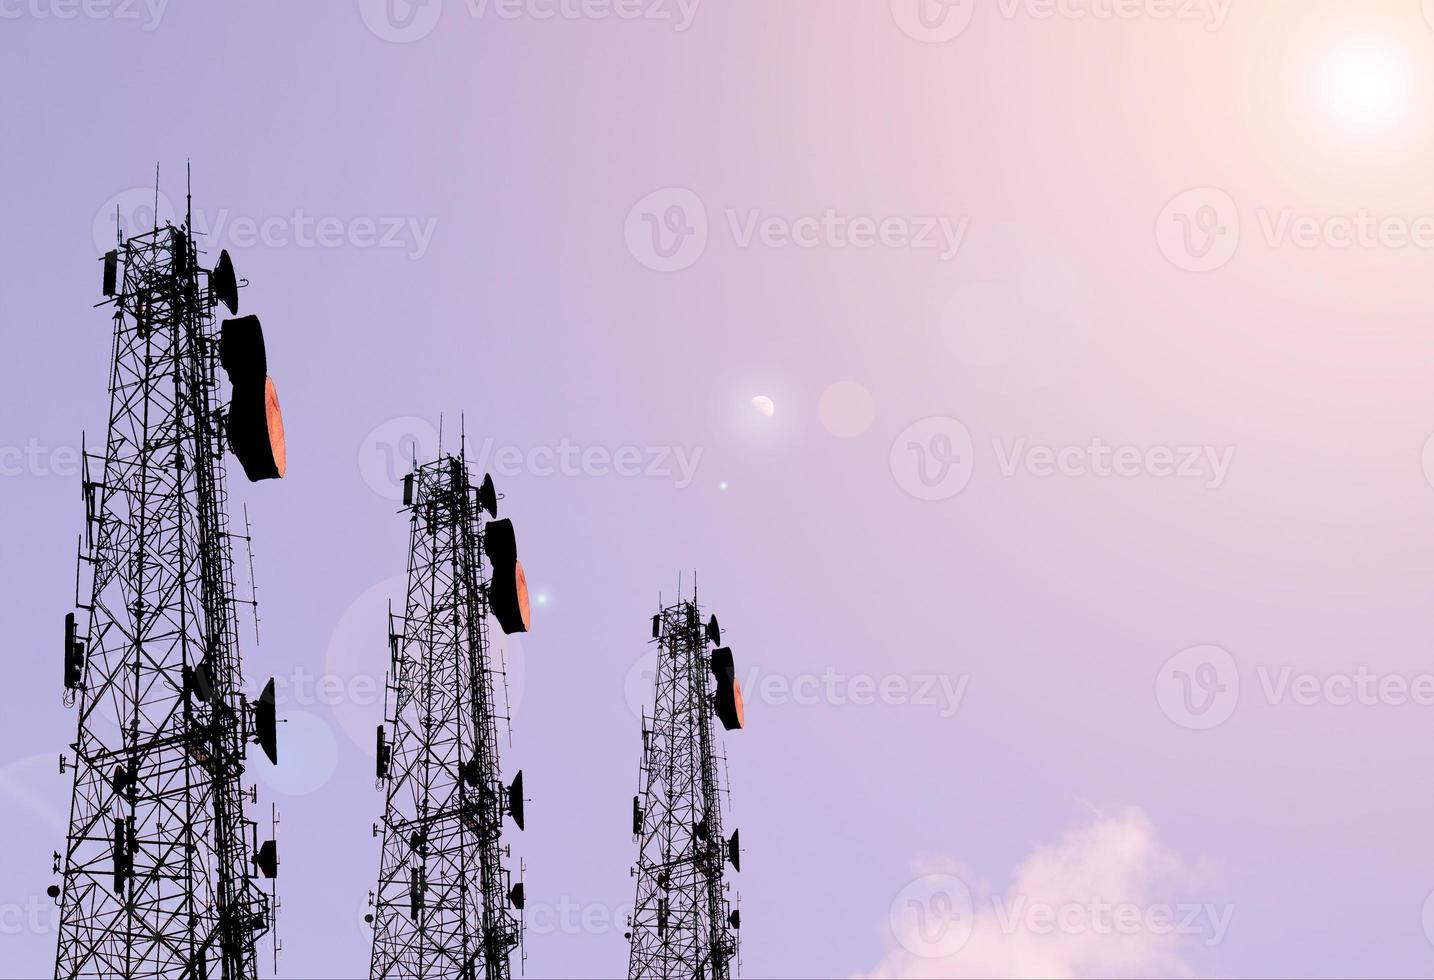 Saturday, telecommunication signal, three towers, facing data signal in the evening, receiving the light of the sunset and having a Lens Flare with small clouds. There are stars that are not clear photo